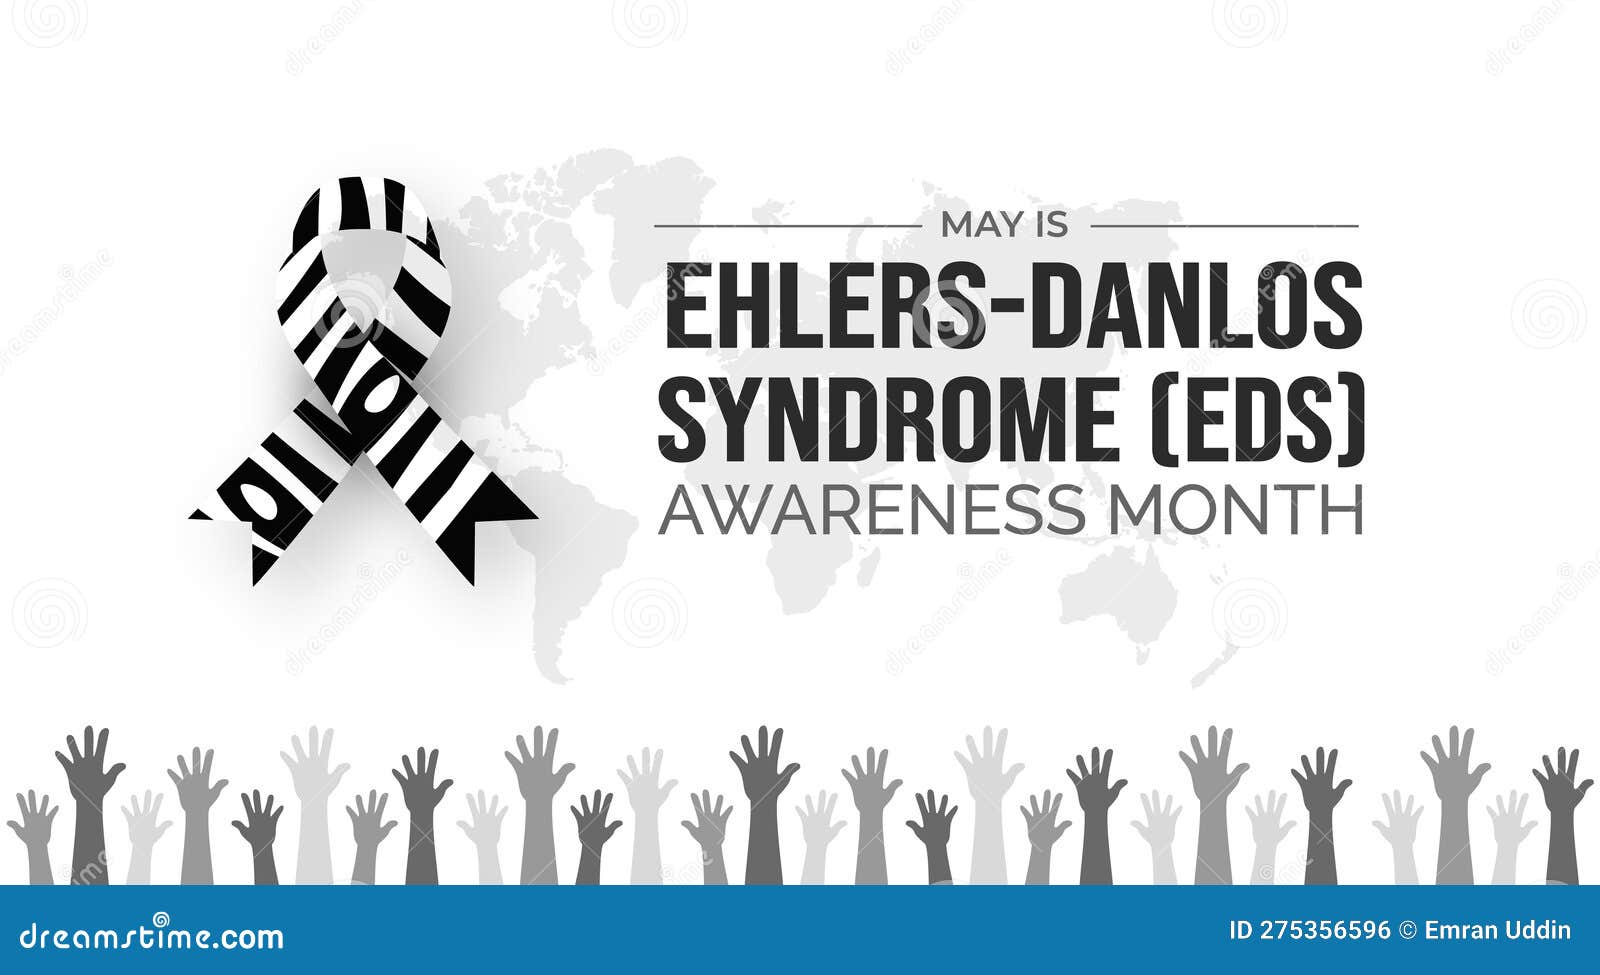 ehlers danlos syndrome (eds) month background or banner  template